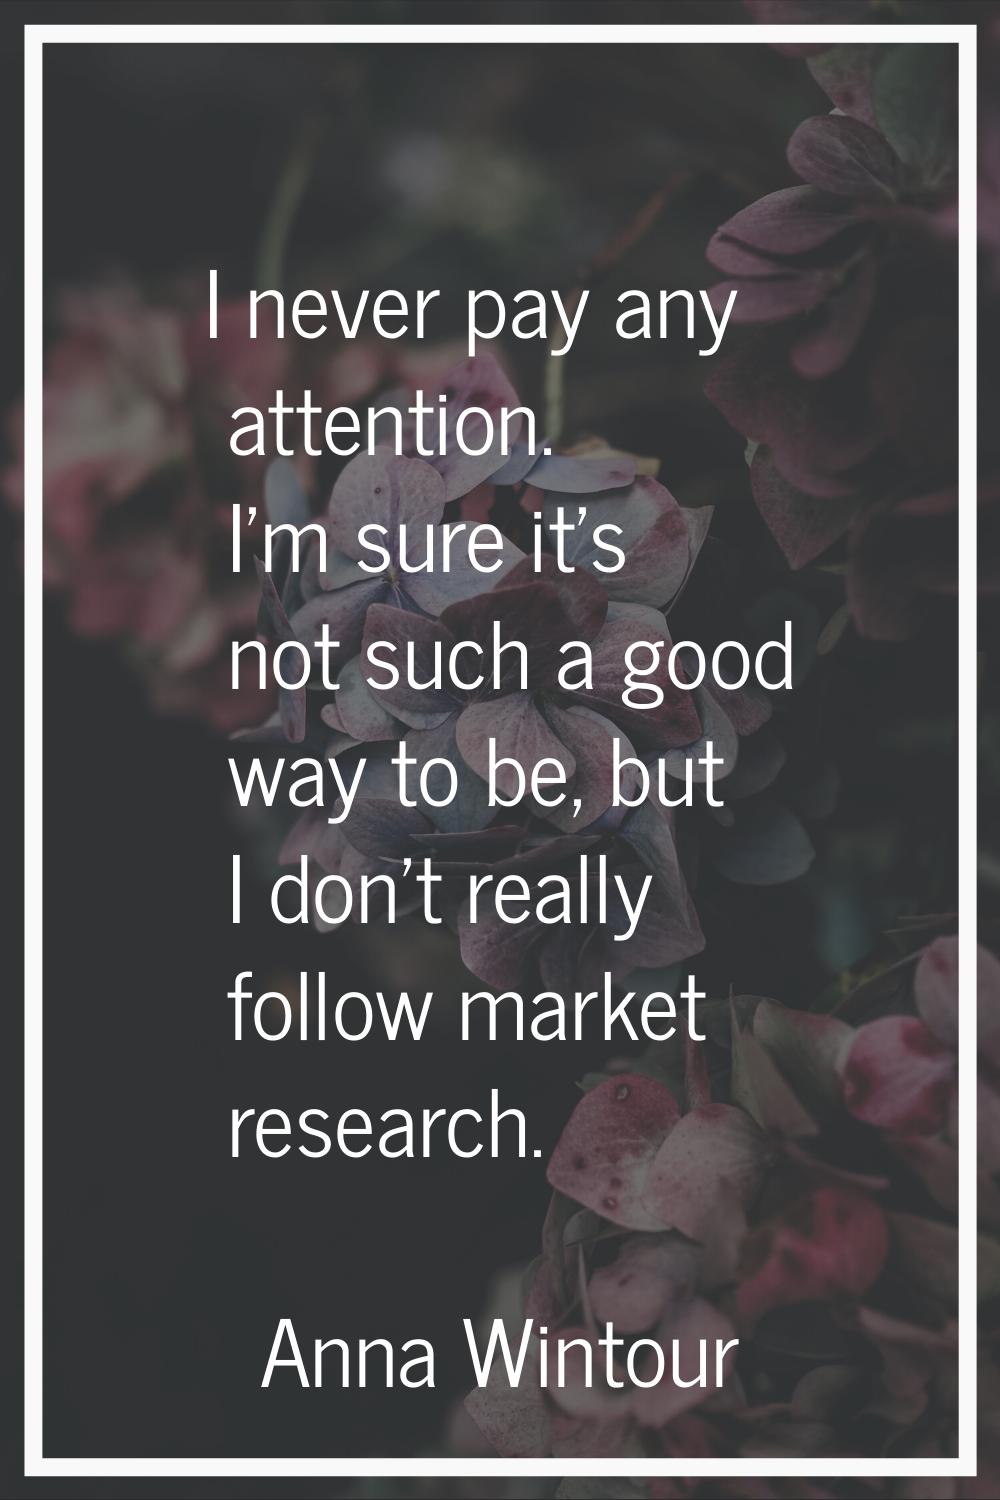 I never pay any attention. I'm sure it's not such a good way to be, but I don't really follow marke